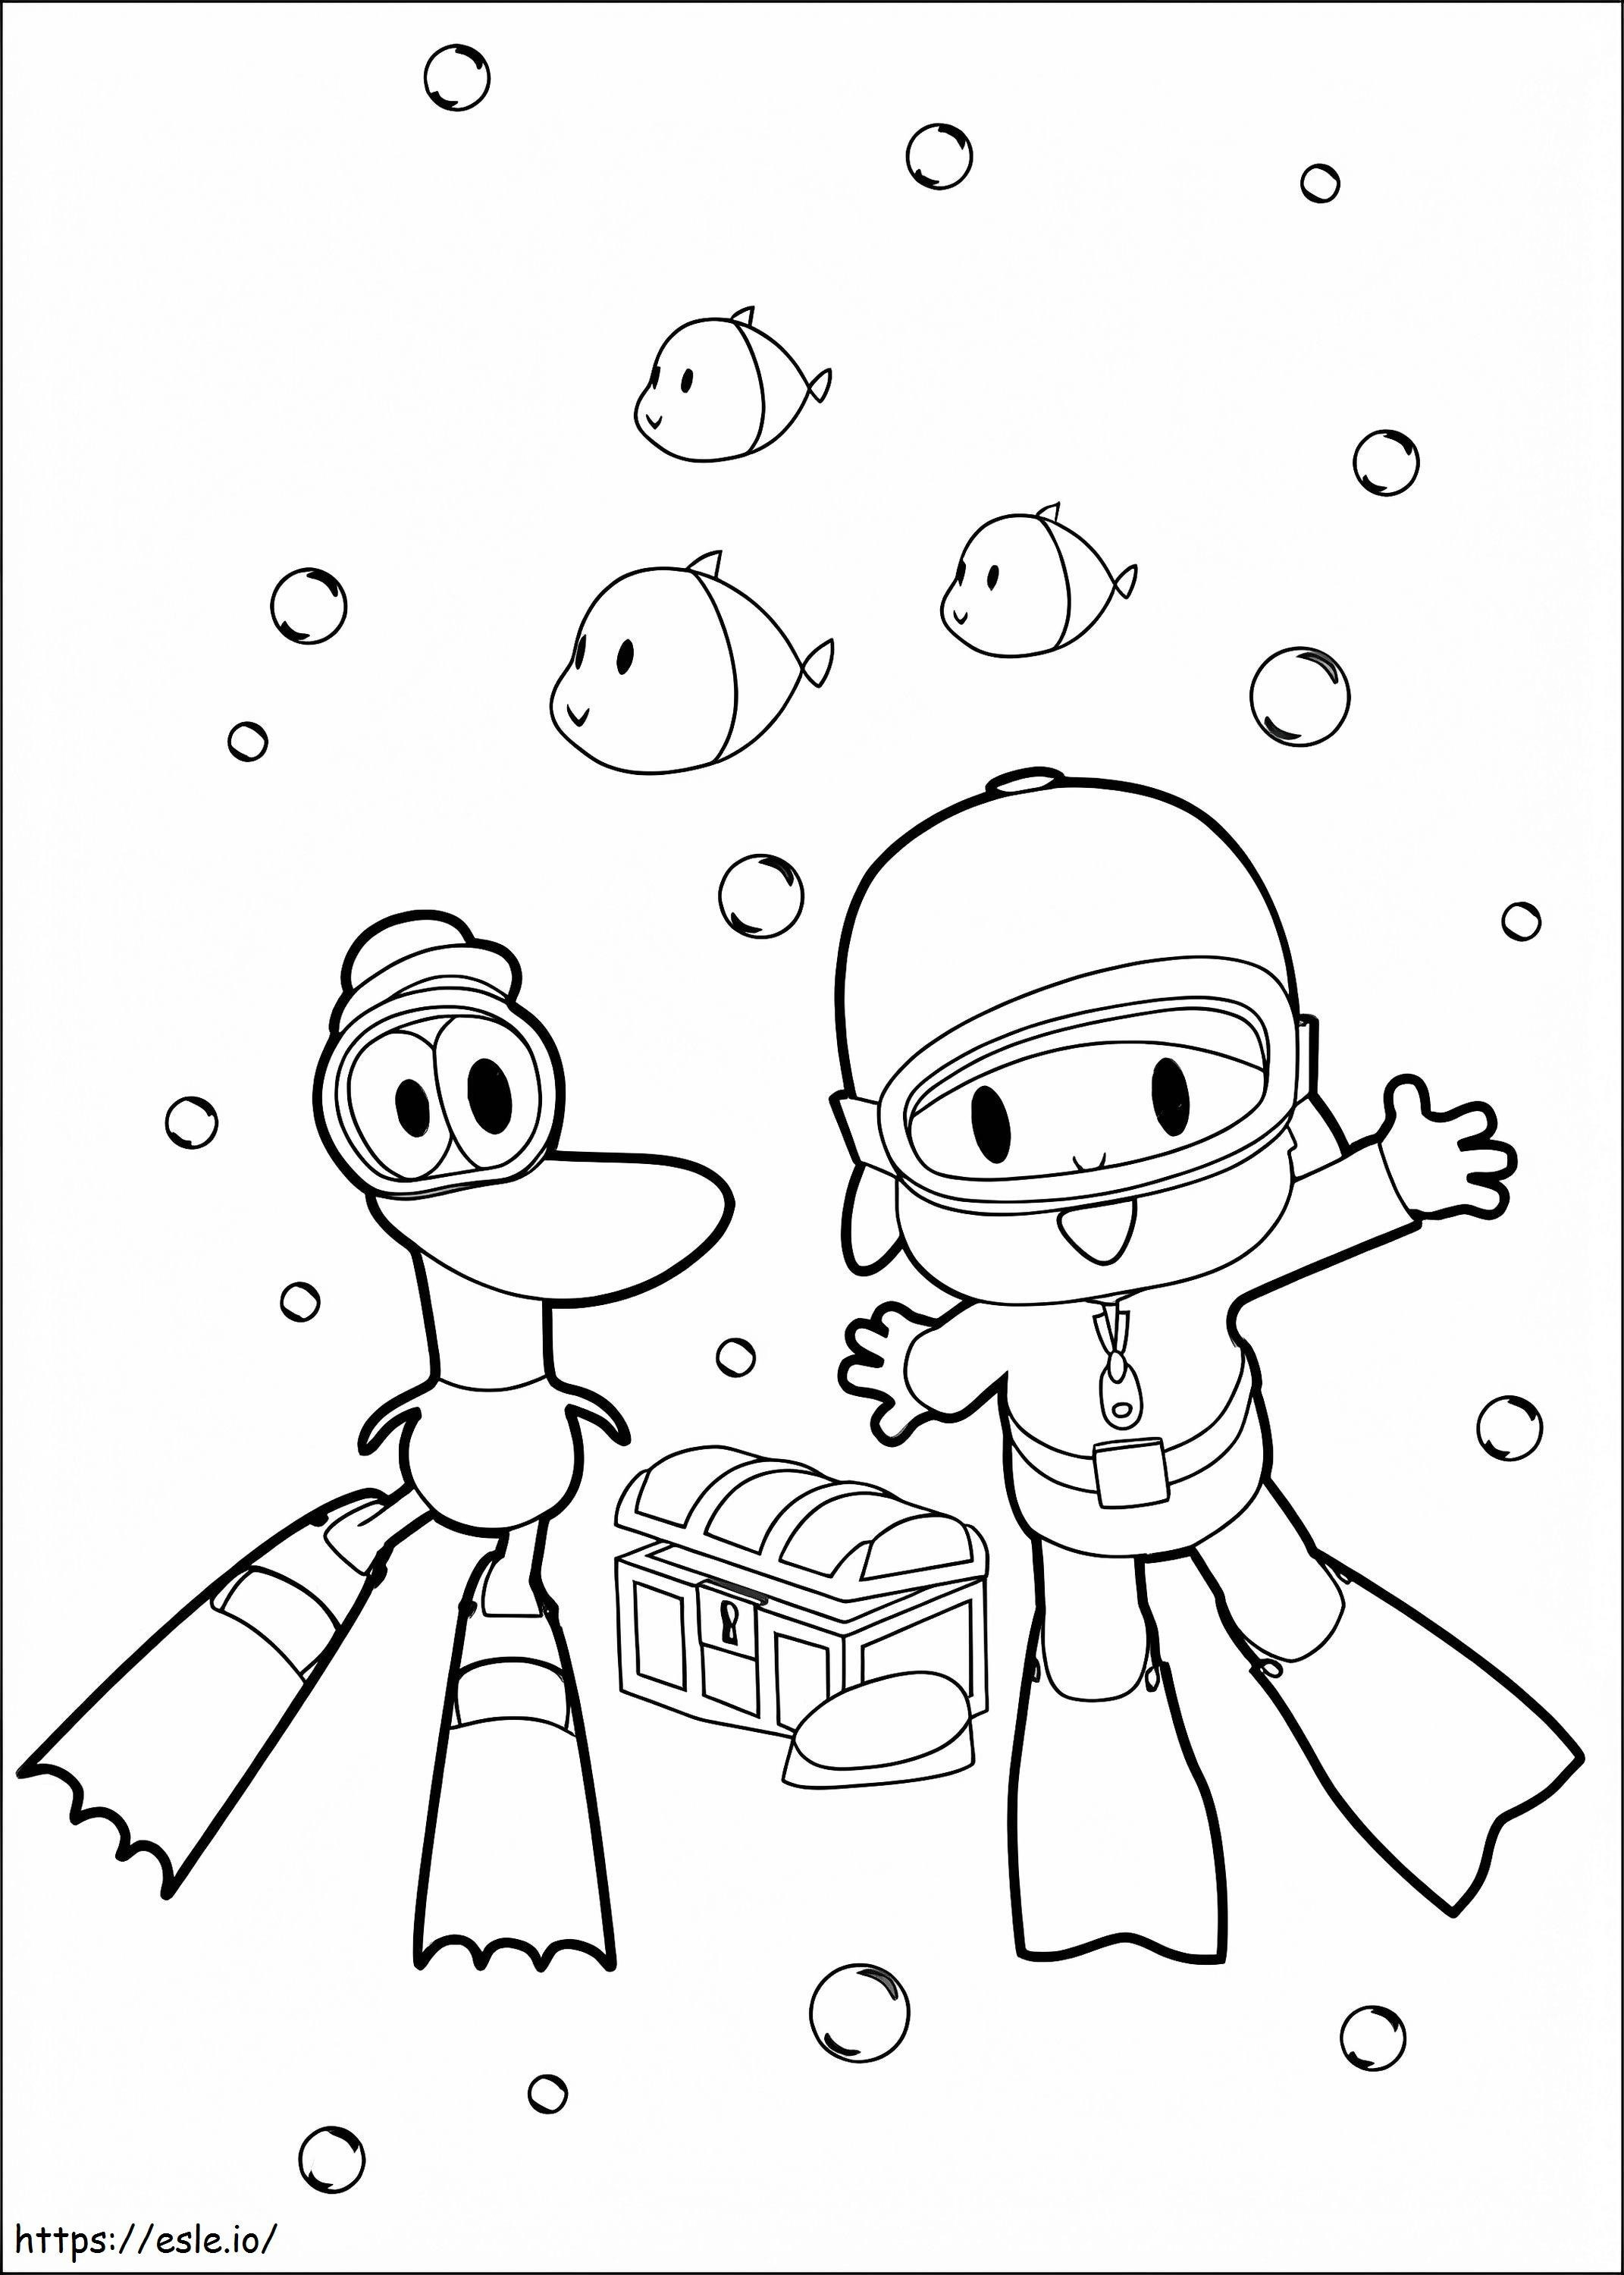 Pocoyo And Pato In The Sea coloring page